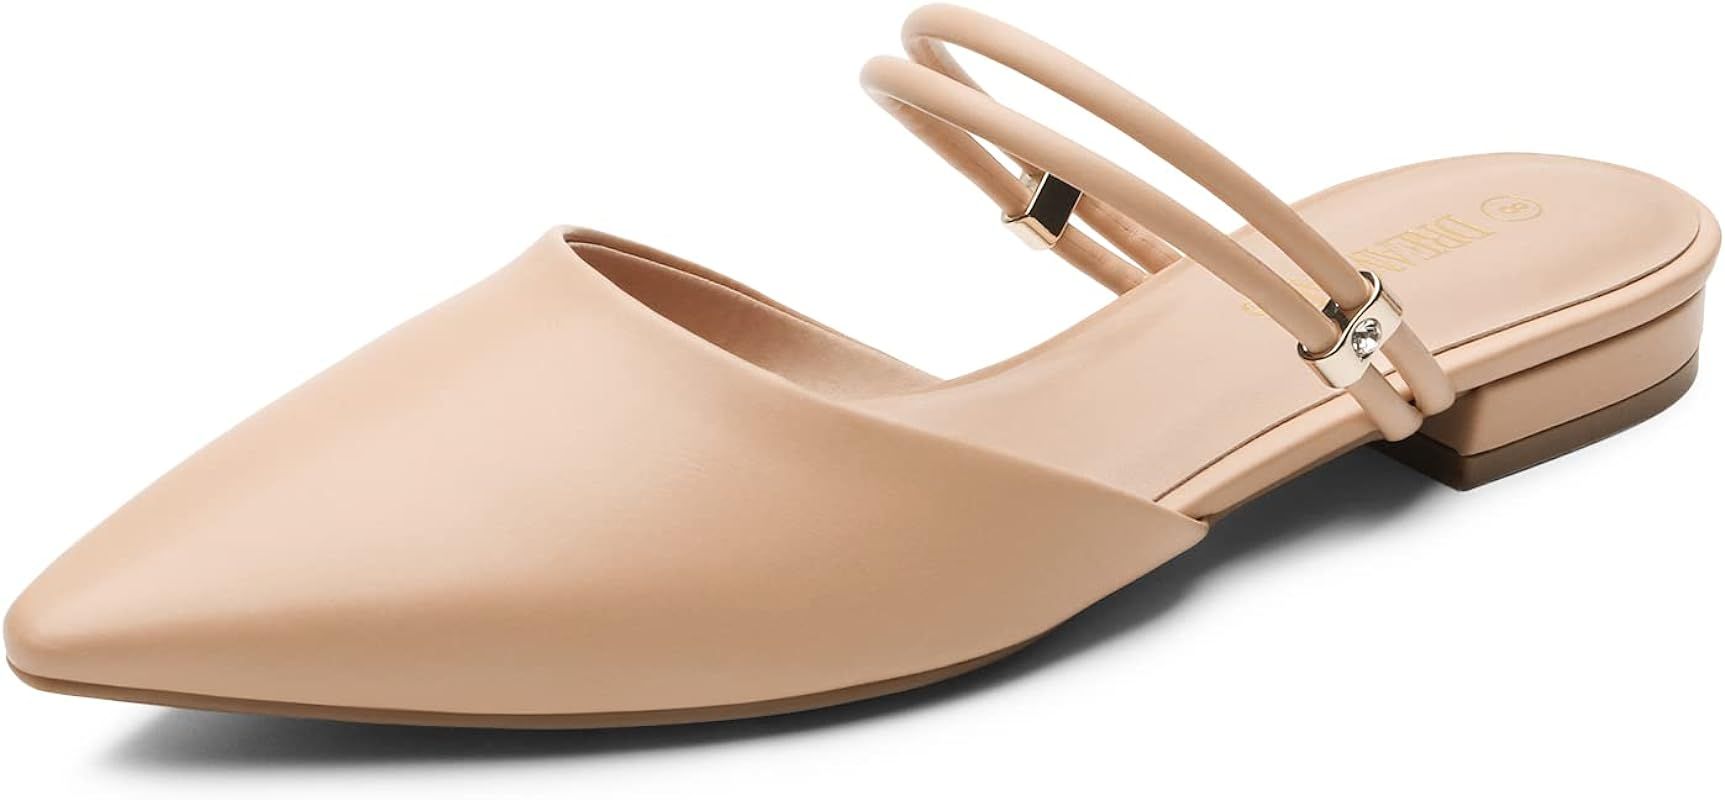 Mules for Women Flats Pointed Toe Two-Way Wear Slip on Slides Shoes | Amazon (US)